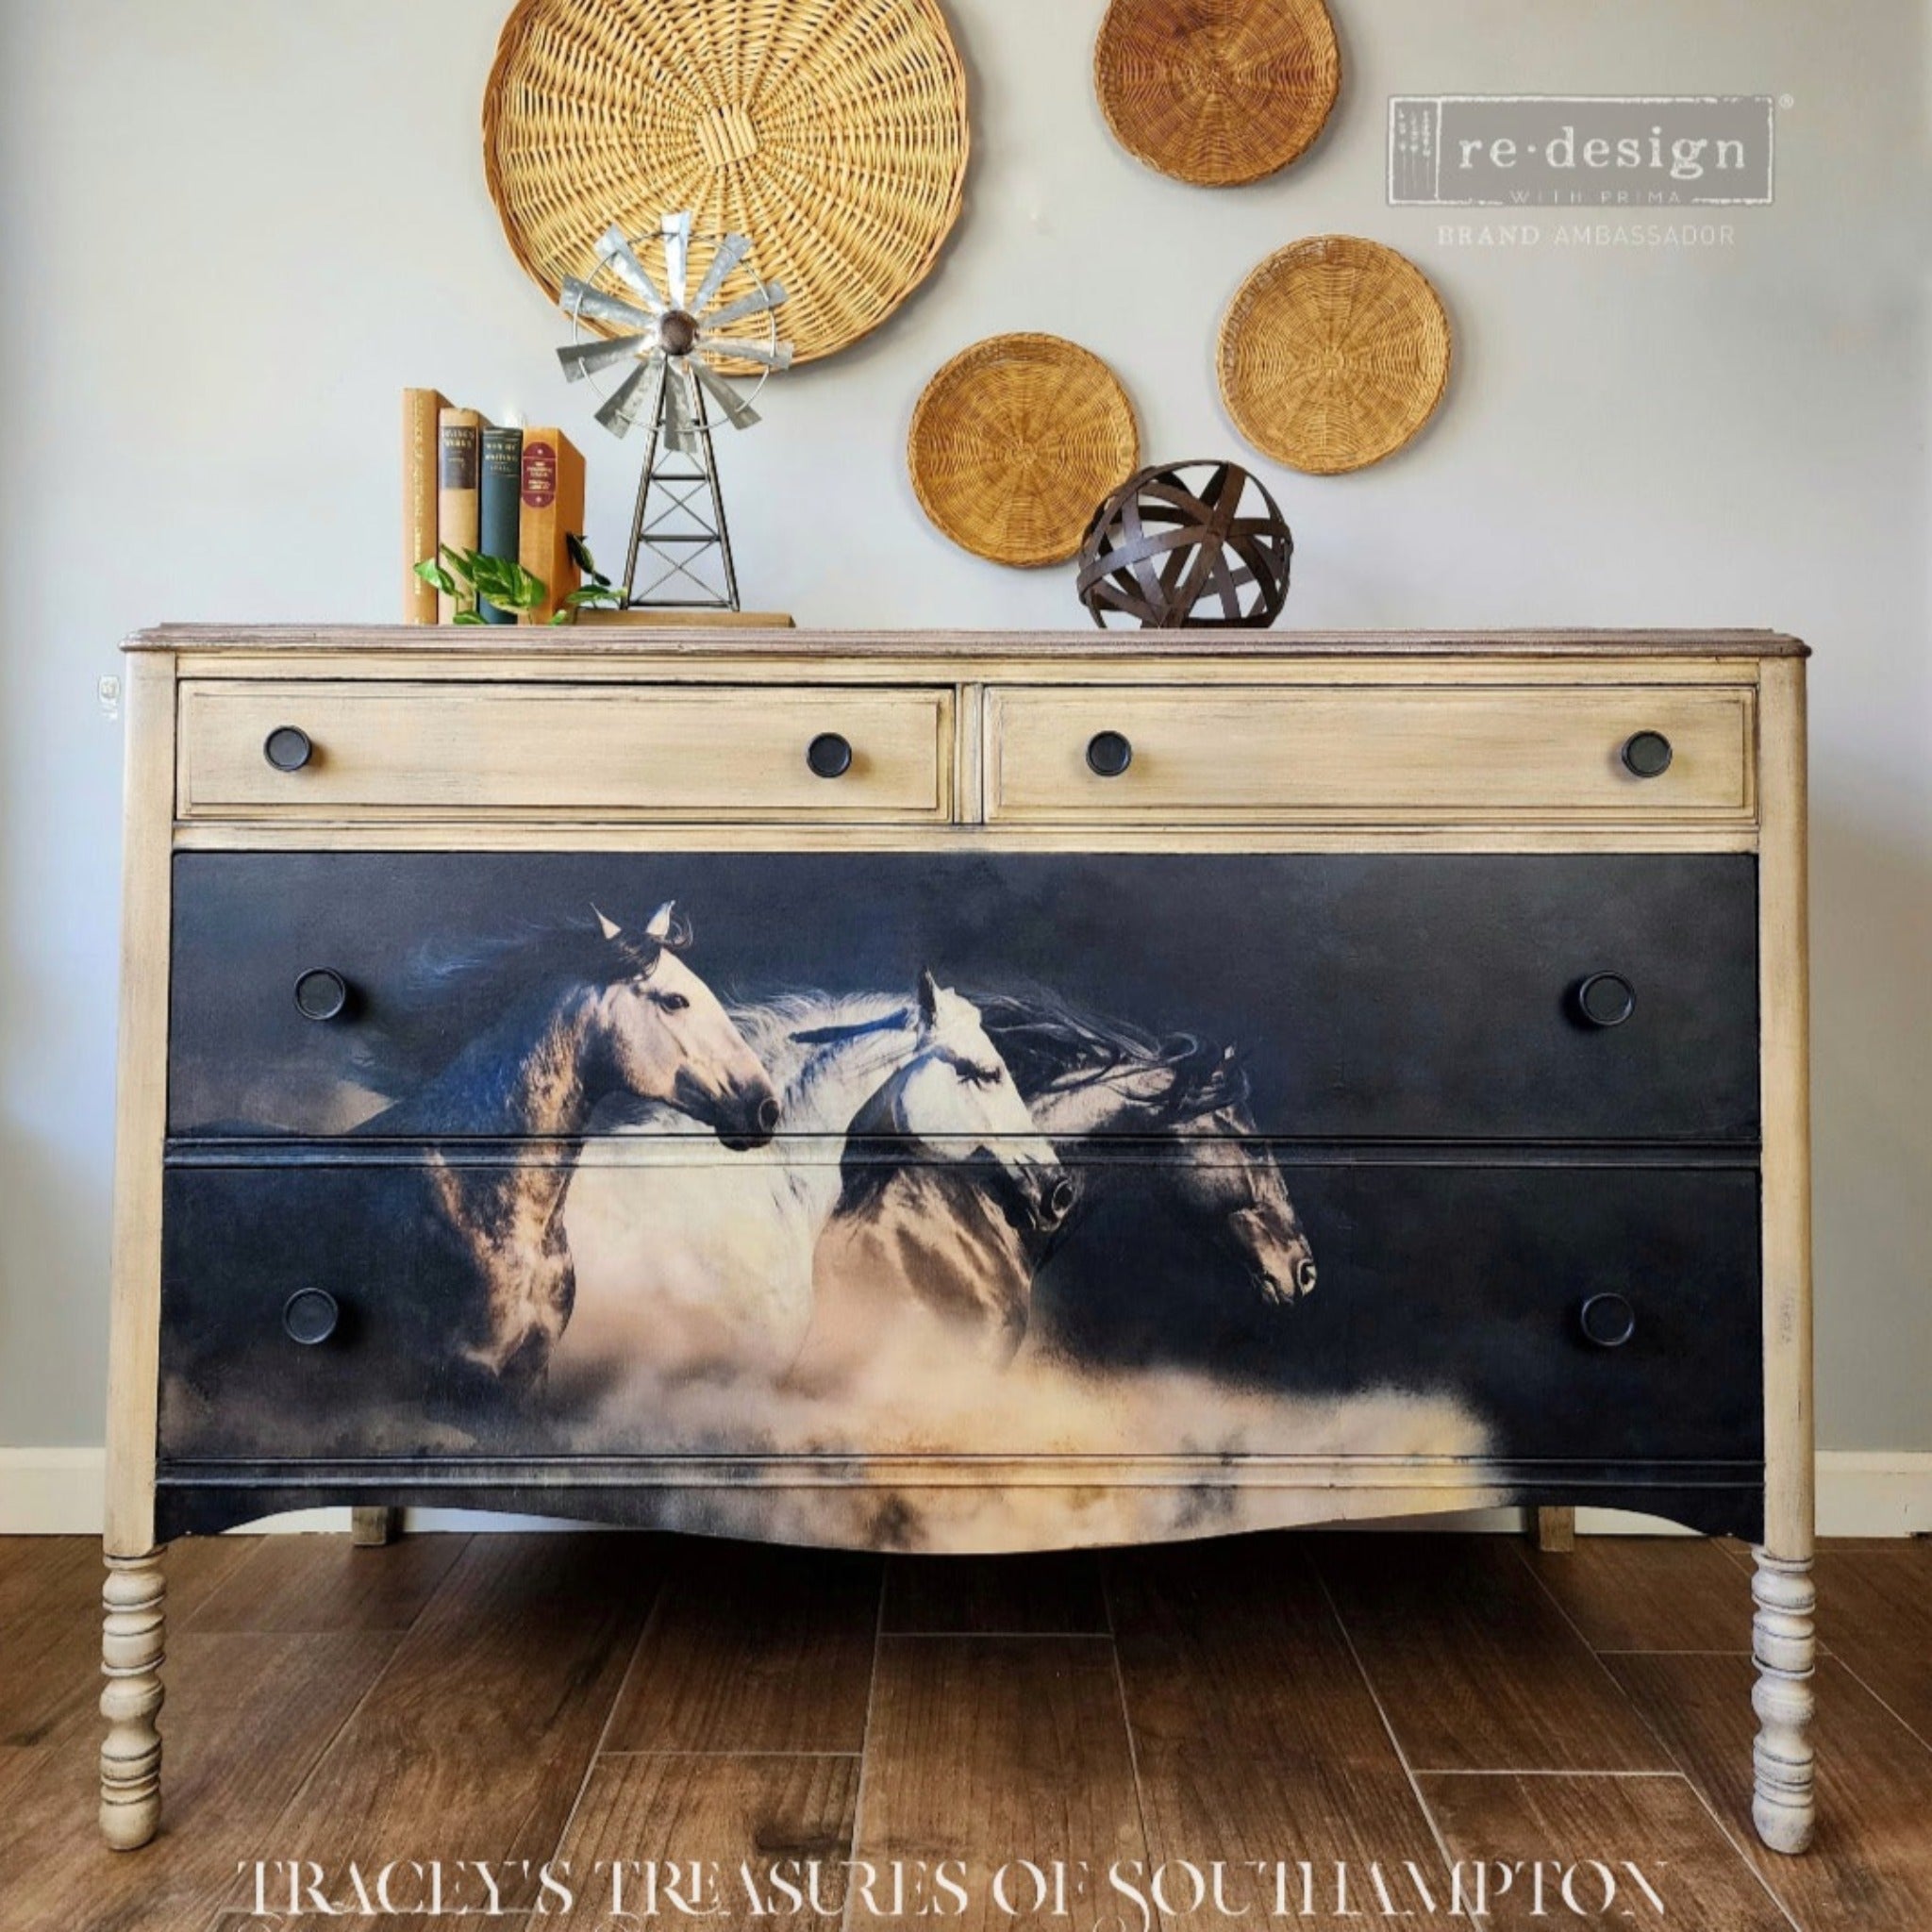 A vintage dresser refurbished by Tracey's Treasures of Southampton is painted a pale tan color and features ReDesign with Prima's Wild Hearts Run Free A1 fiber paper on its 2 large bottom drawers.